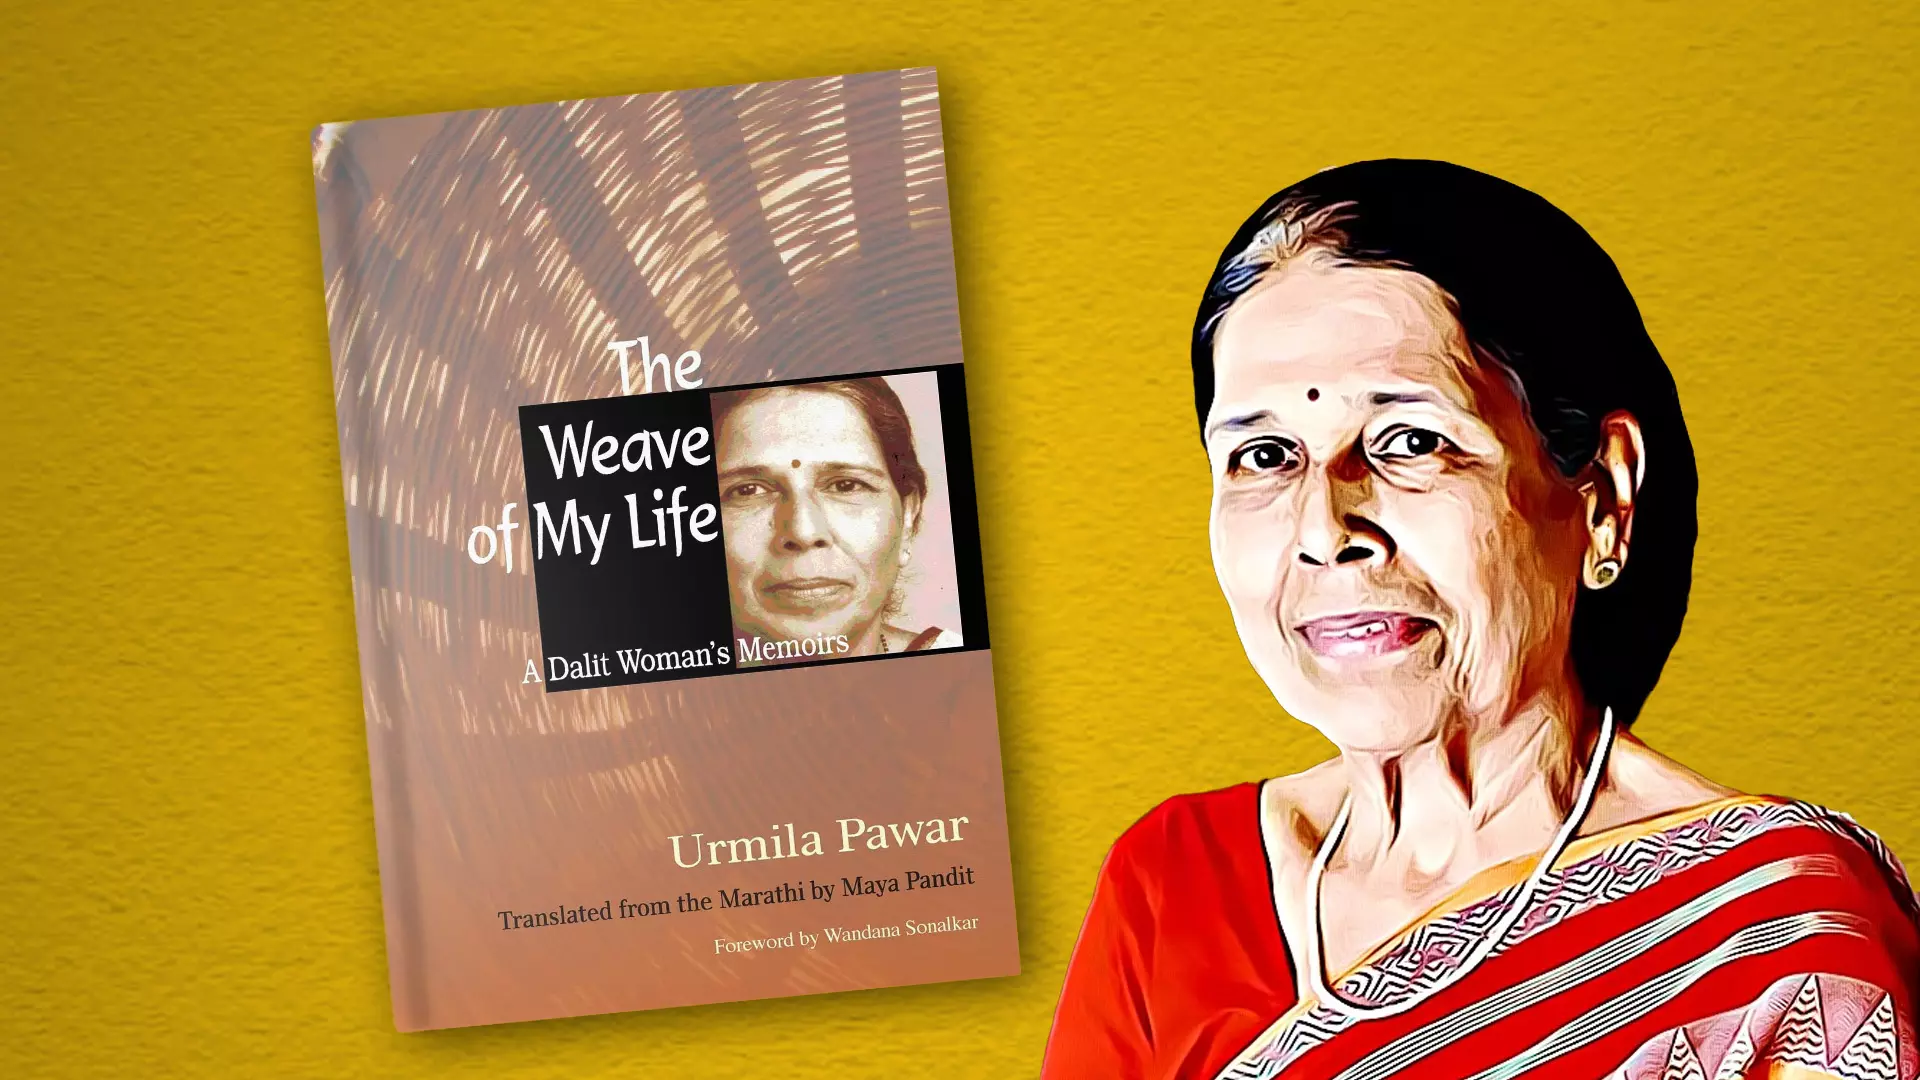 The Weave of My Life captures three generations of Dalit women struggling to overcome the burden of their caste.